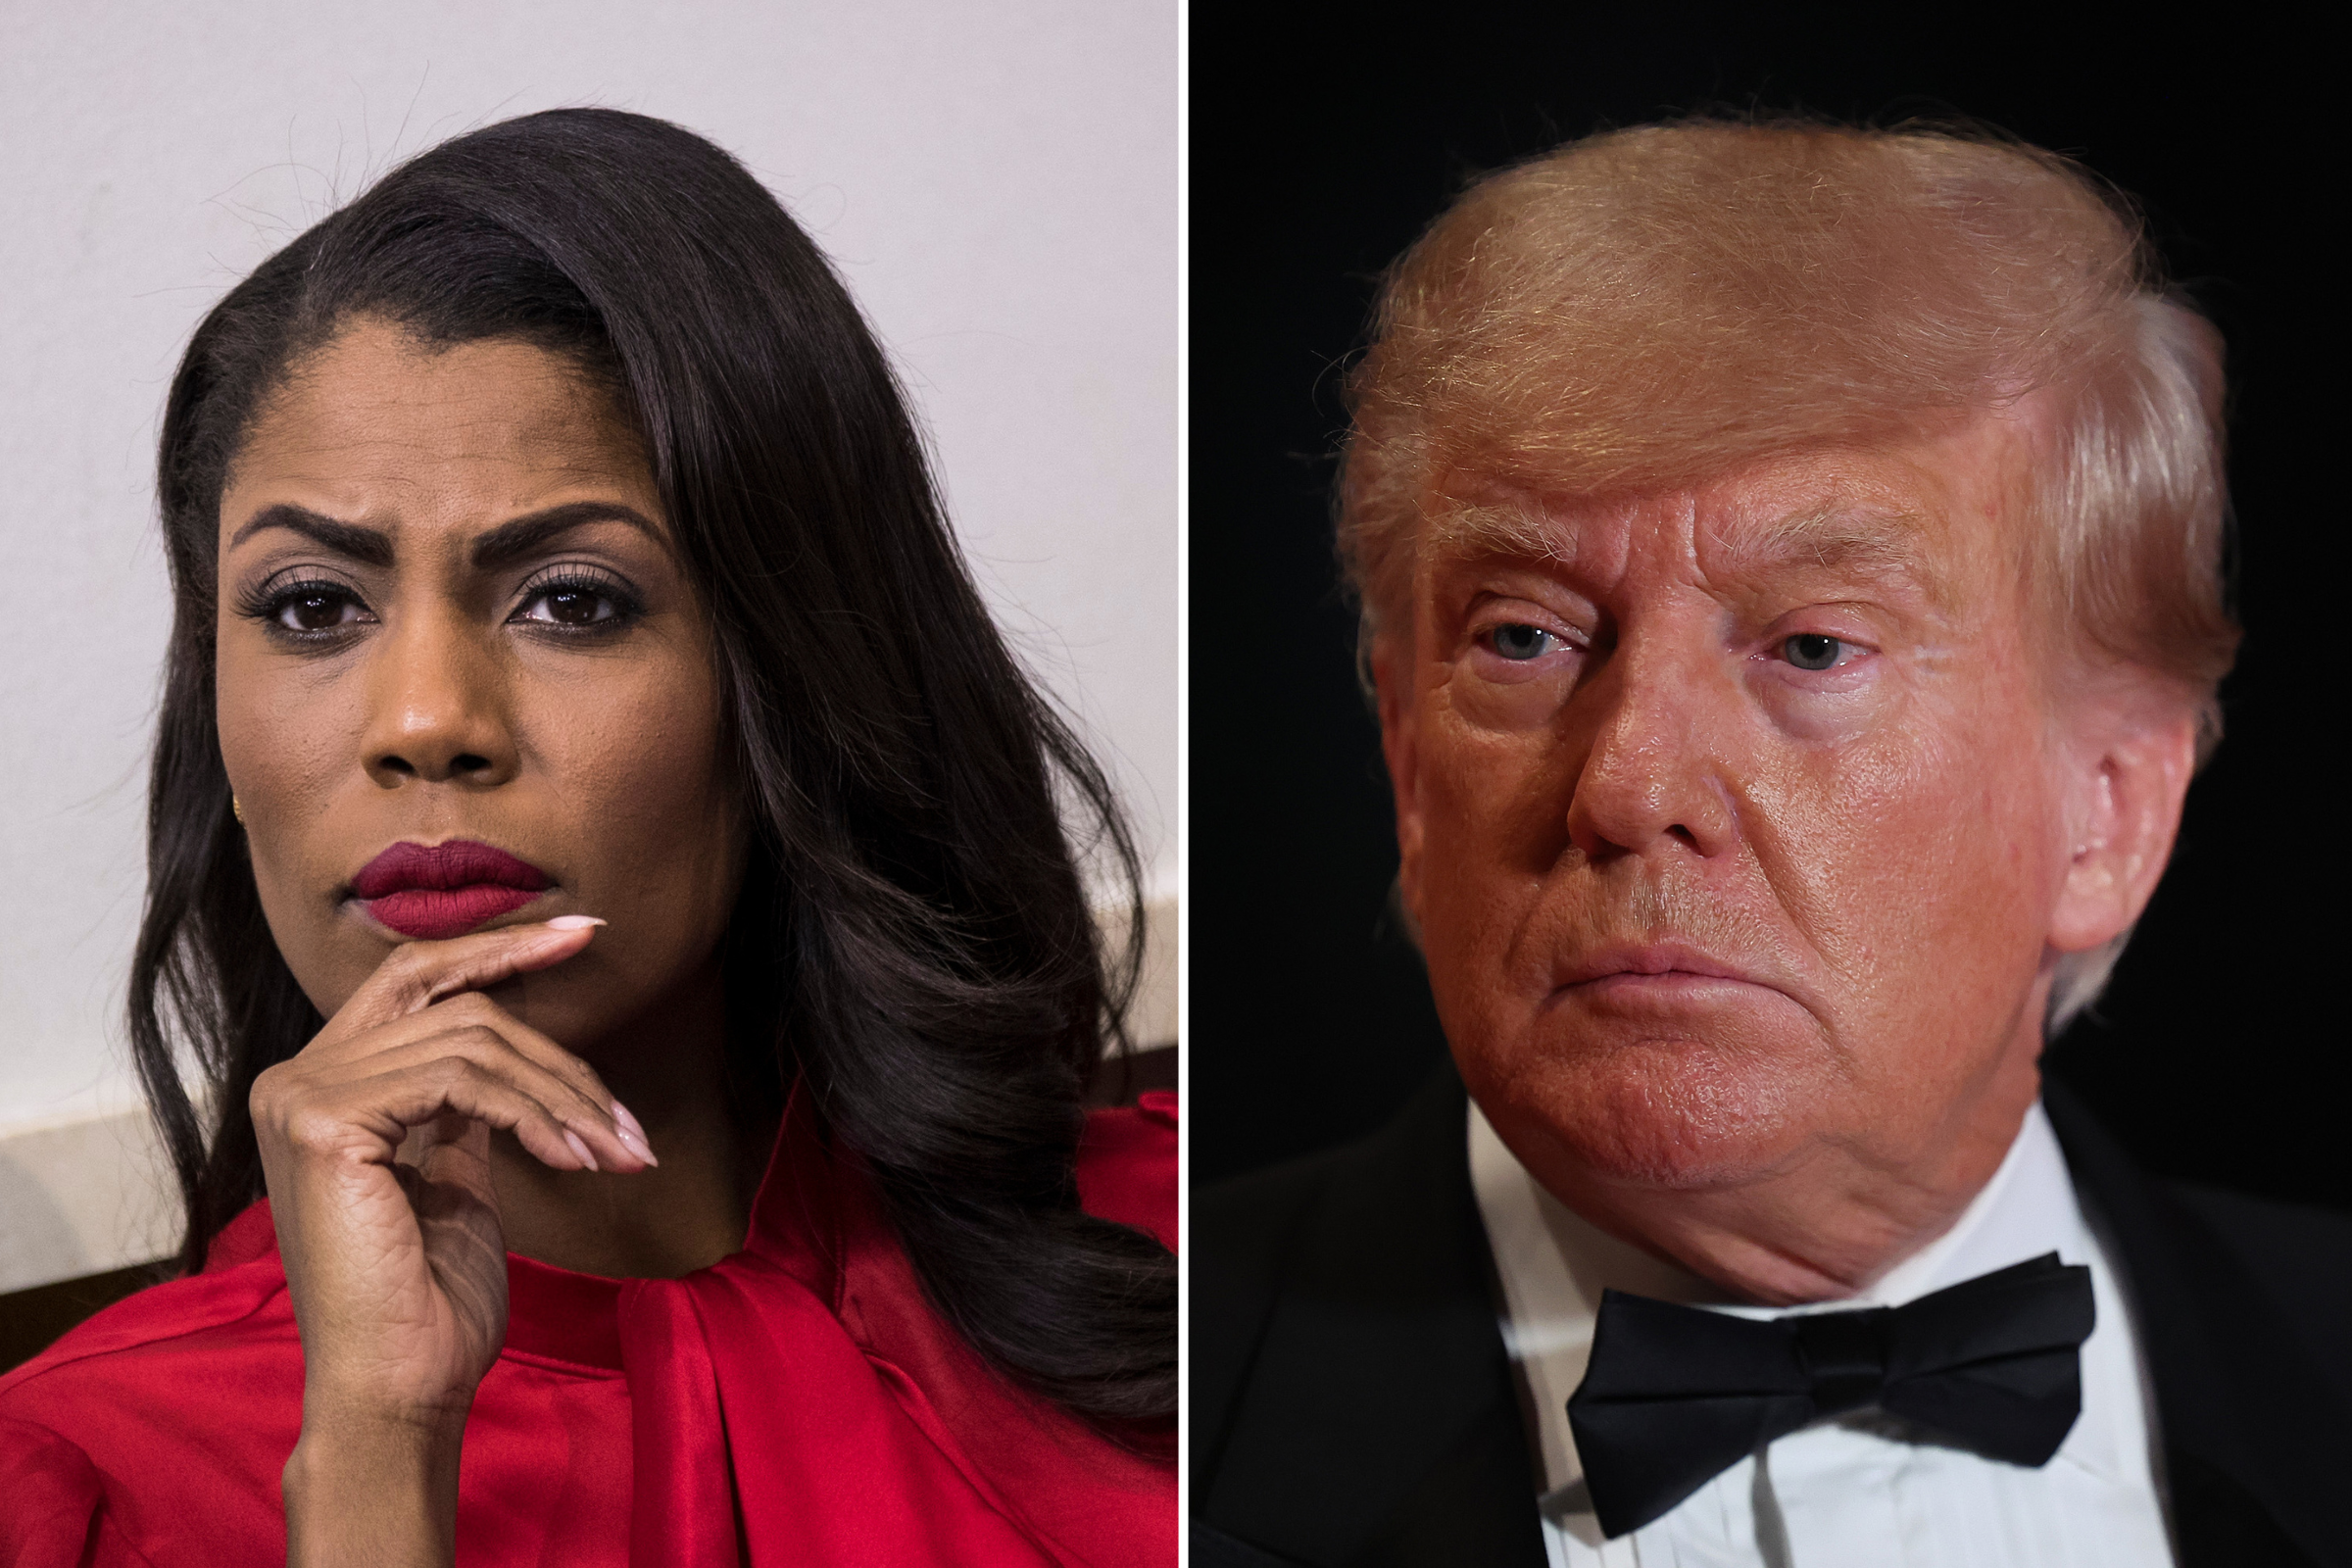 Trump’s negative secrets and tapes kept in “infamous vault,” Omarosa says